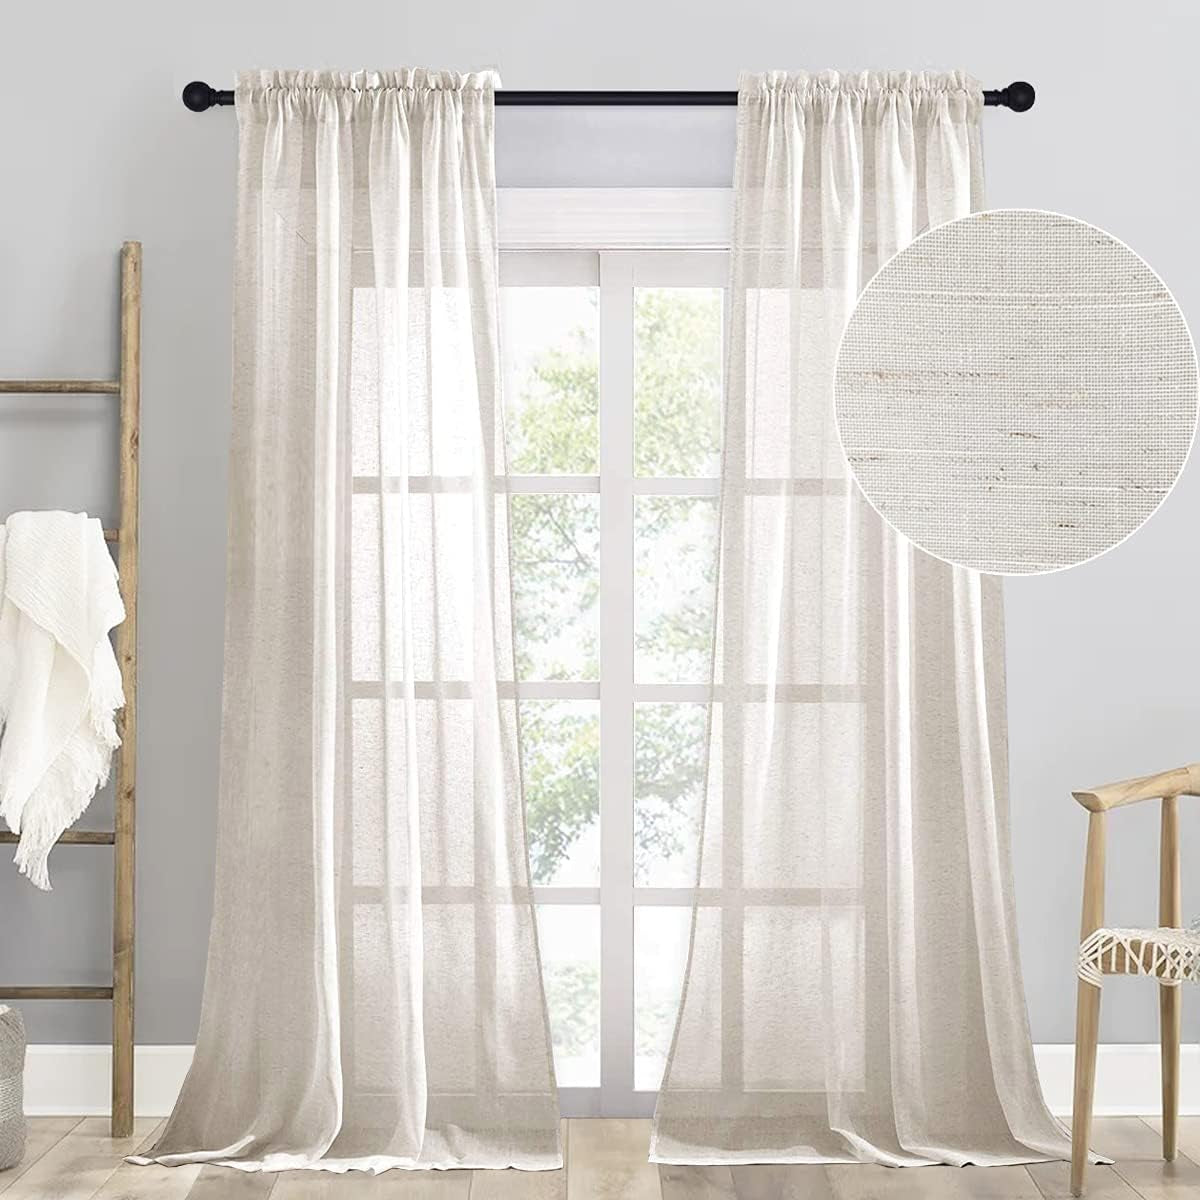 SOFJAGETQ Nature Linen Sheer Curtains 84 Inch, Linen Texture Fabric Drapes, Rod Pocket Light Filtering Window Treatment for Living Room, Bedroom, Farmhouse Rustic Semi Sheer Linen Curtains, 2 Panels  SOFJAGETQ Natural 52X96 